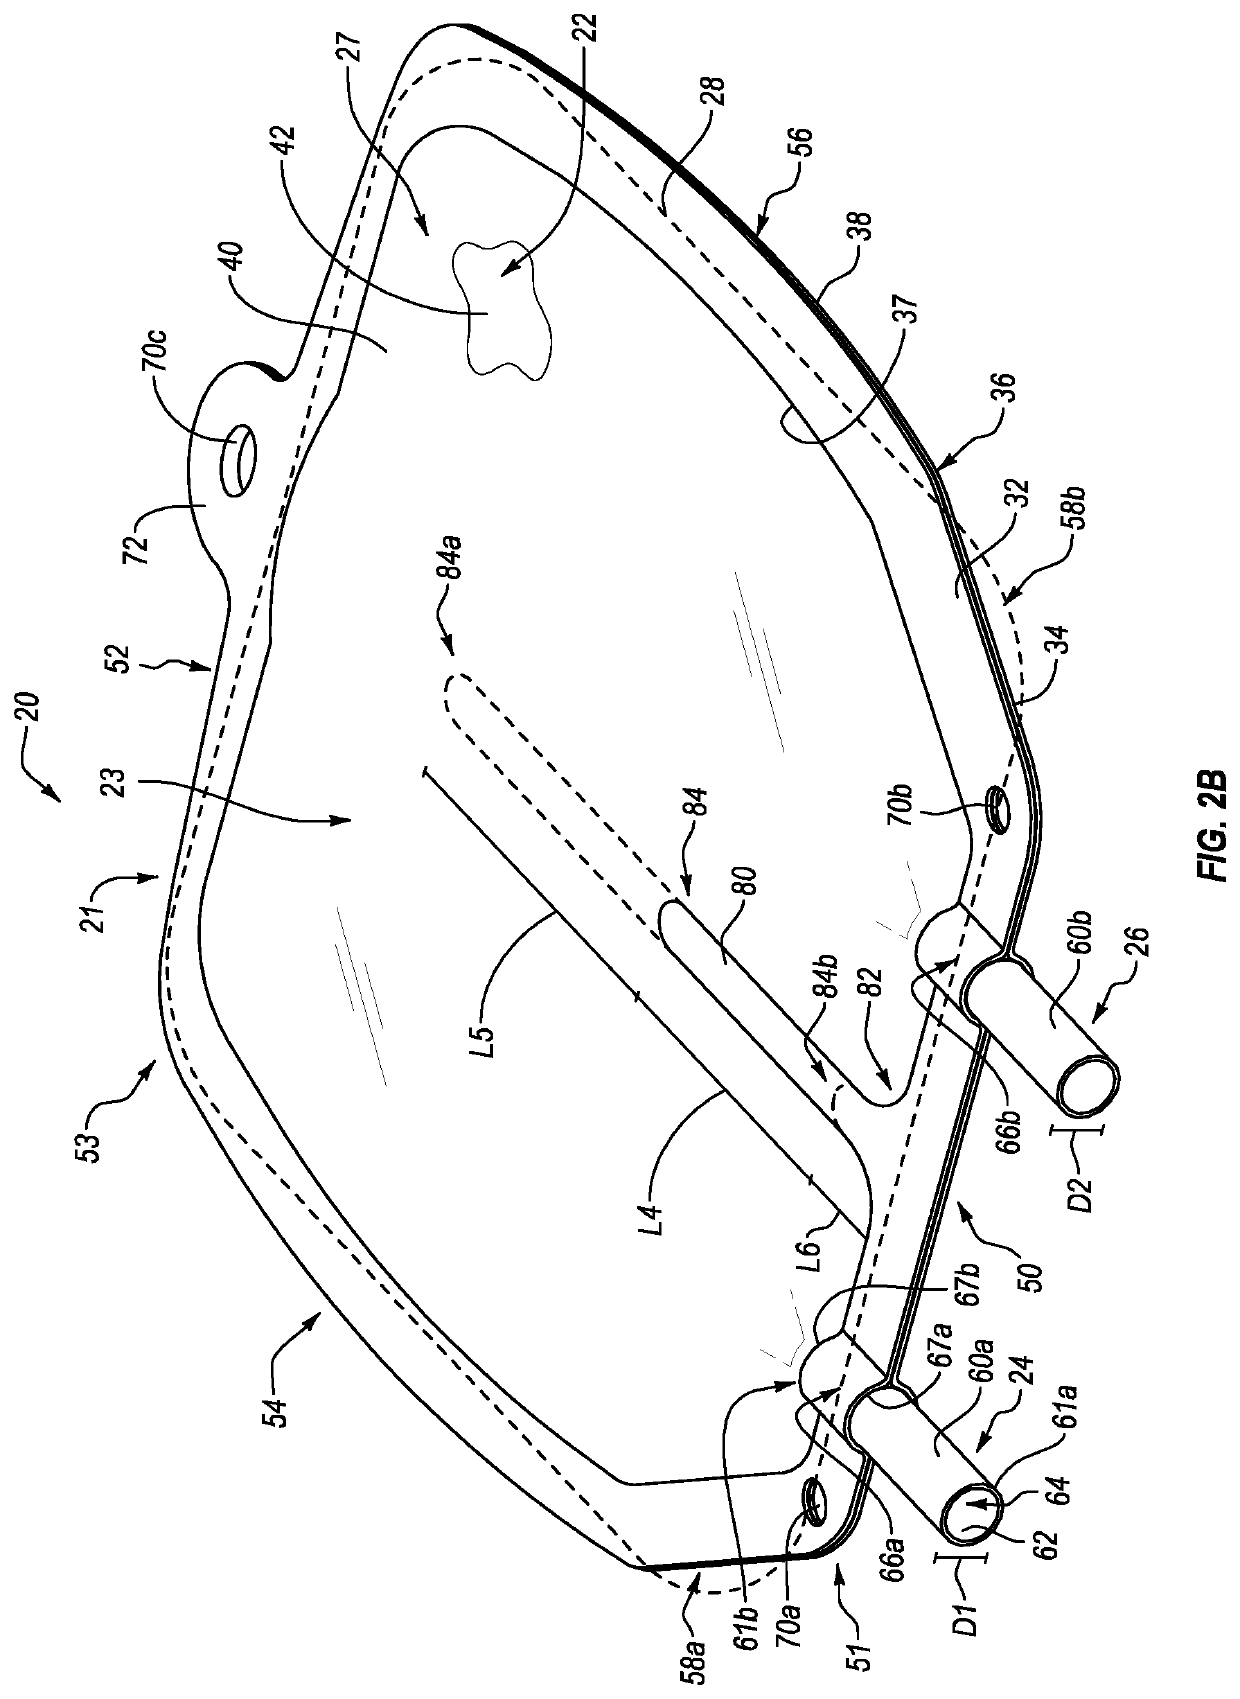 Flexible bioprocessing container with partial dividing partition